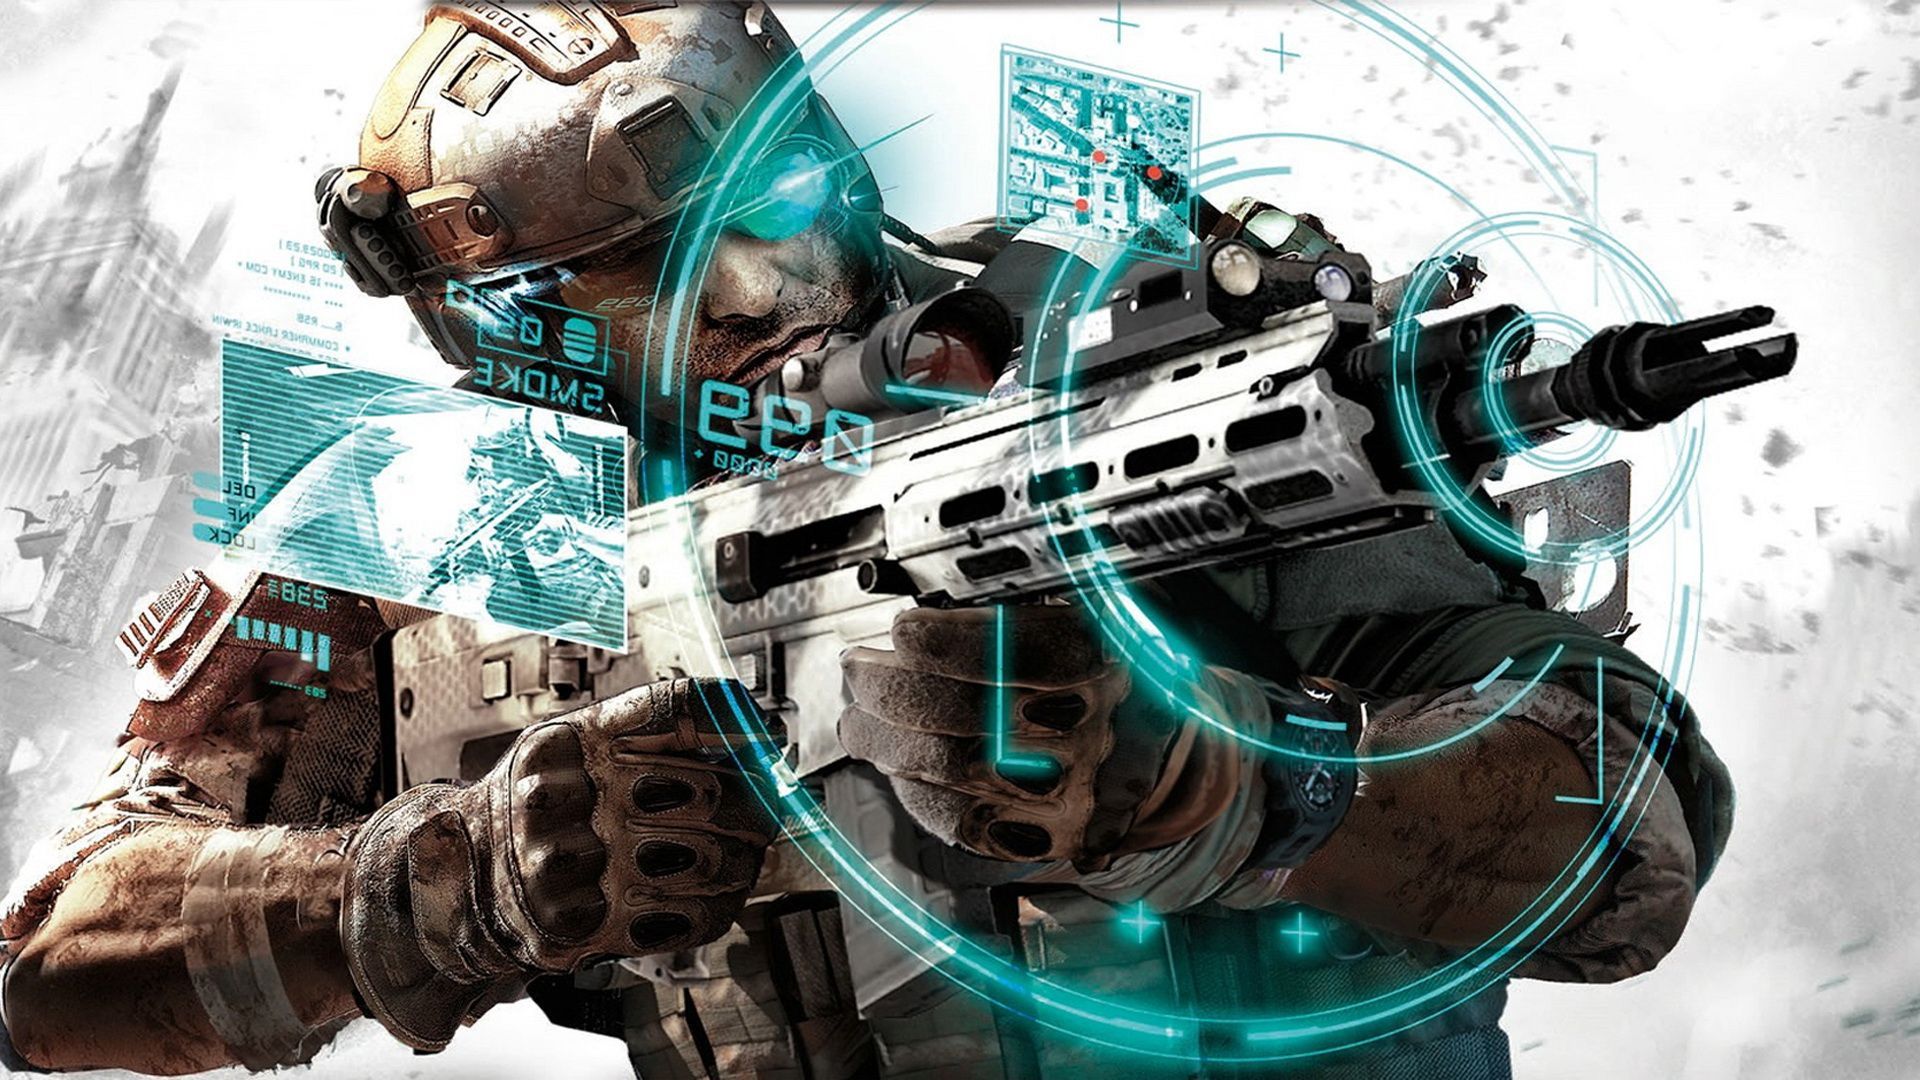 ghost-recon-future-soldier-pc-Game-Wallpaper.jpg